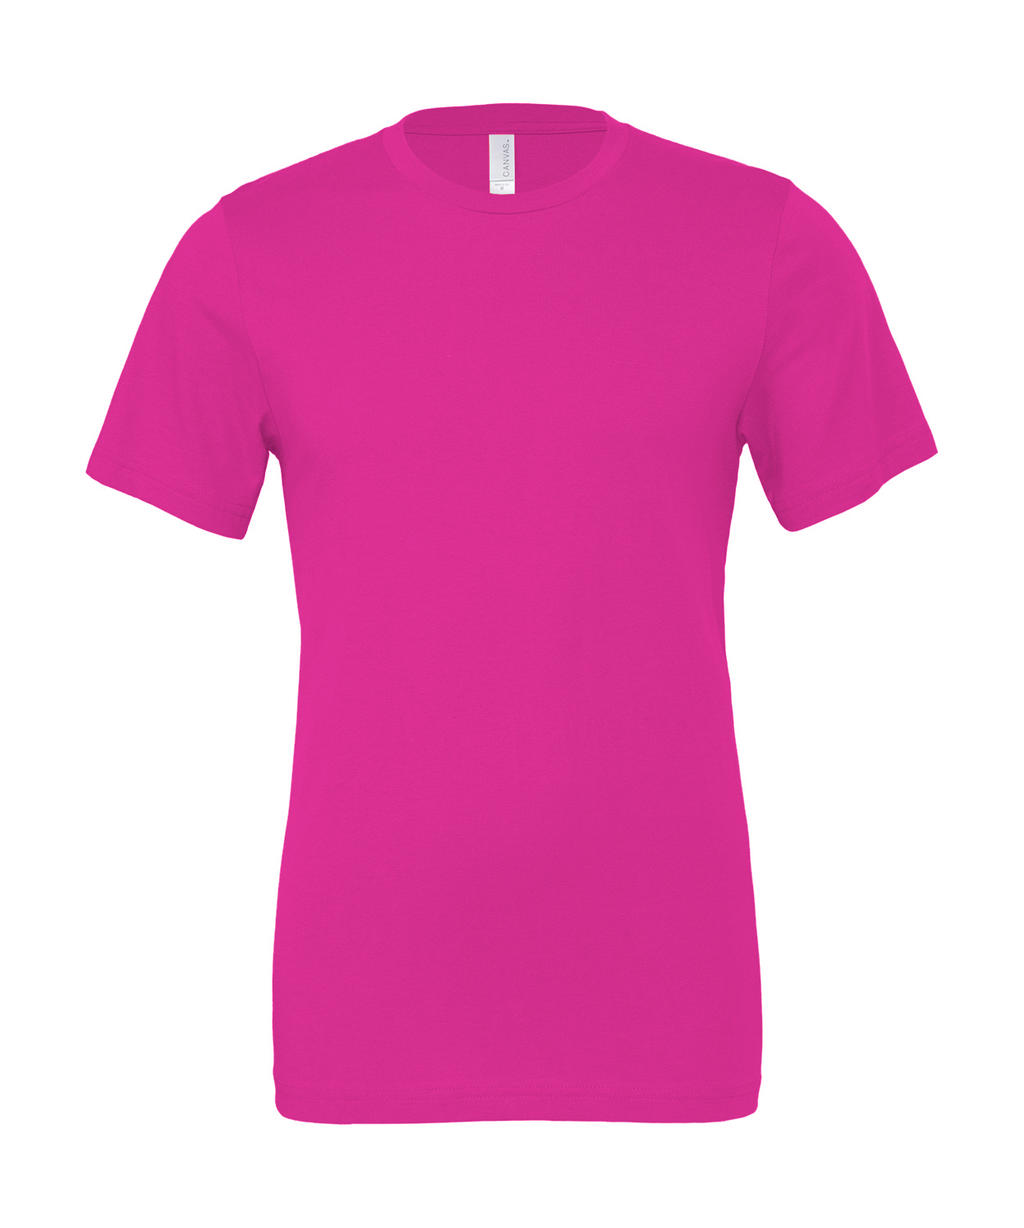  Unisex Jersey Short Sleeve Tee in Farbe Berry